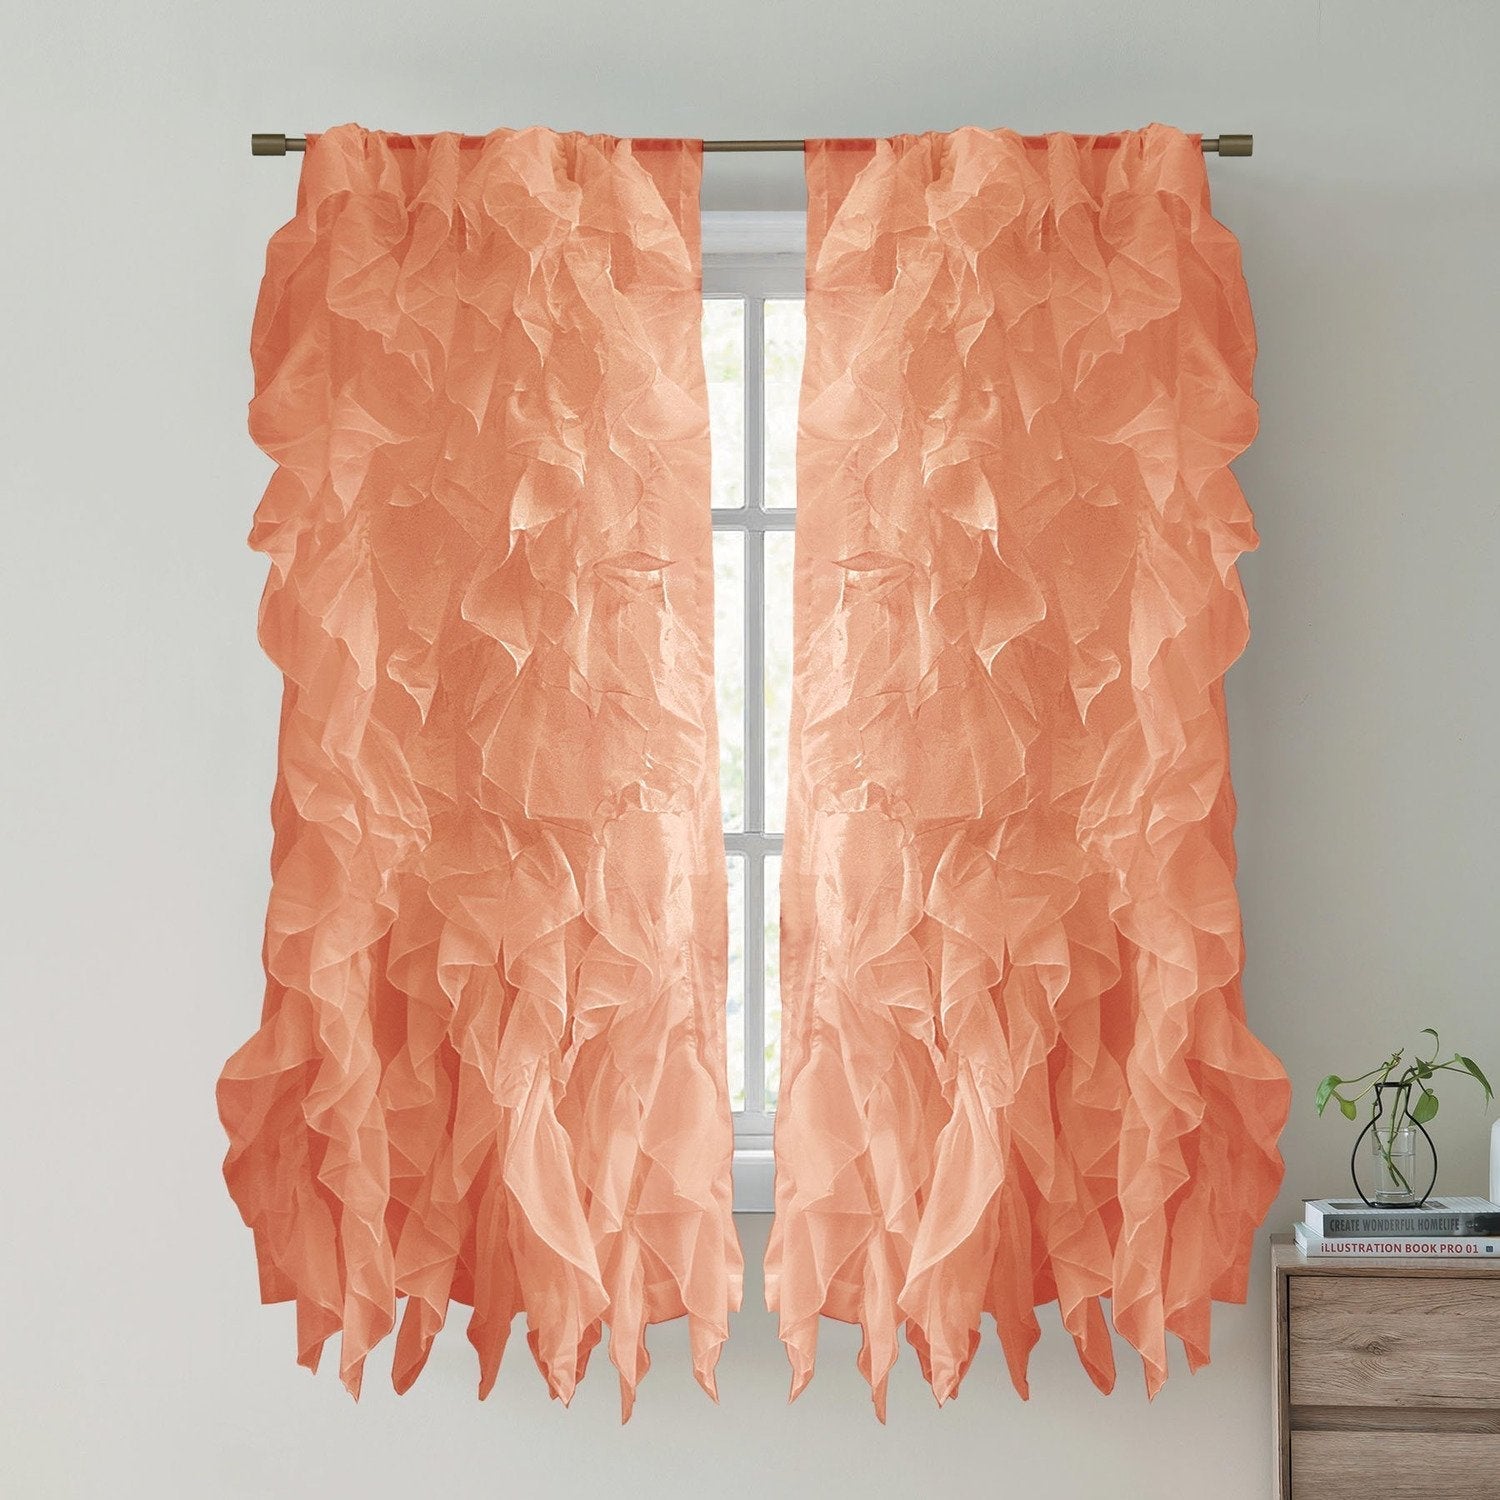 Chic Sheer Voile Ruffled Window Curtain 2-Pack Spice 63X100